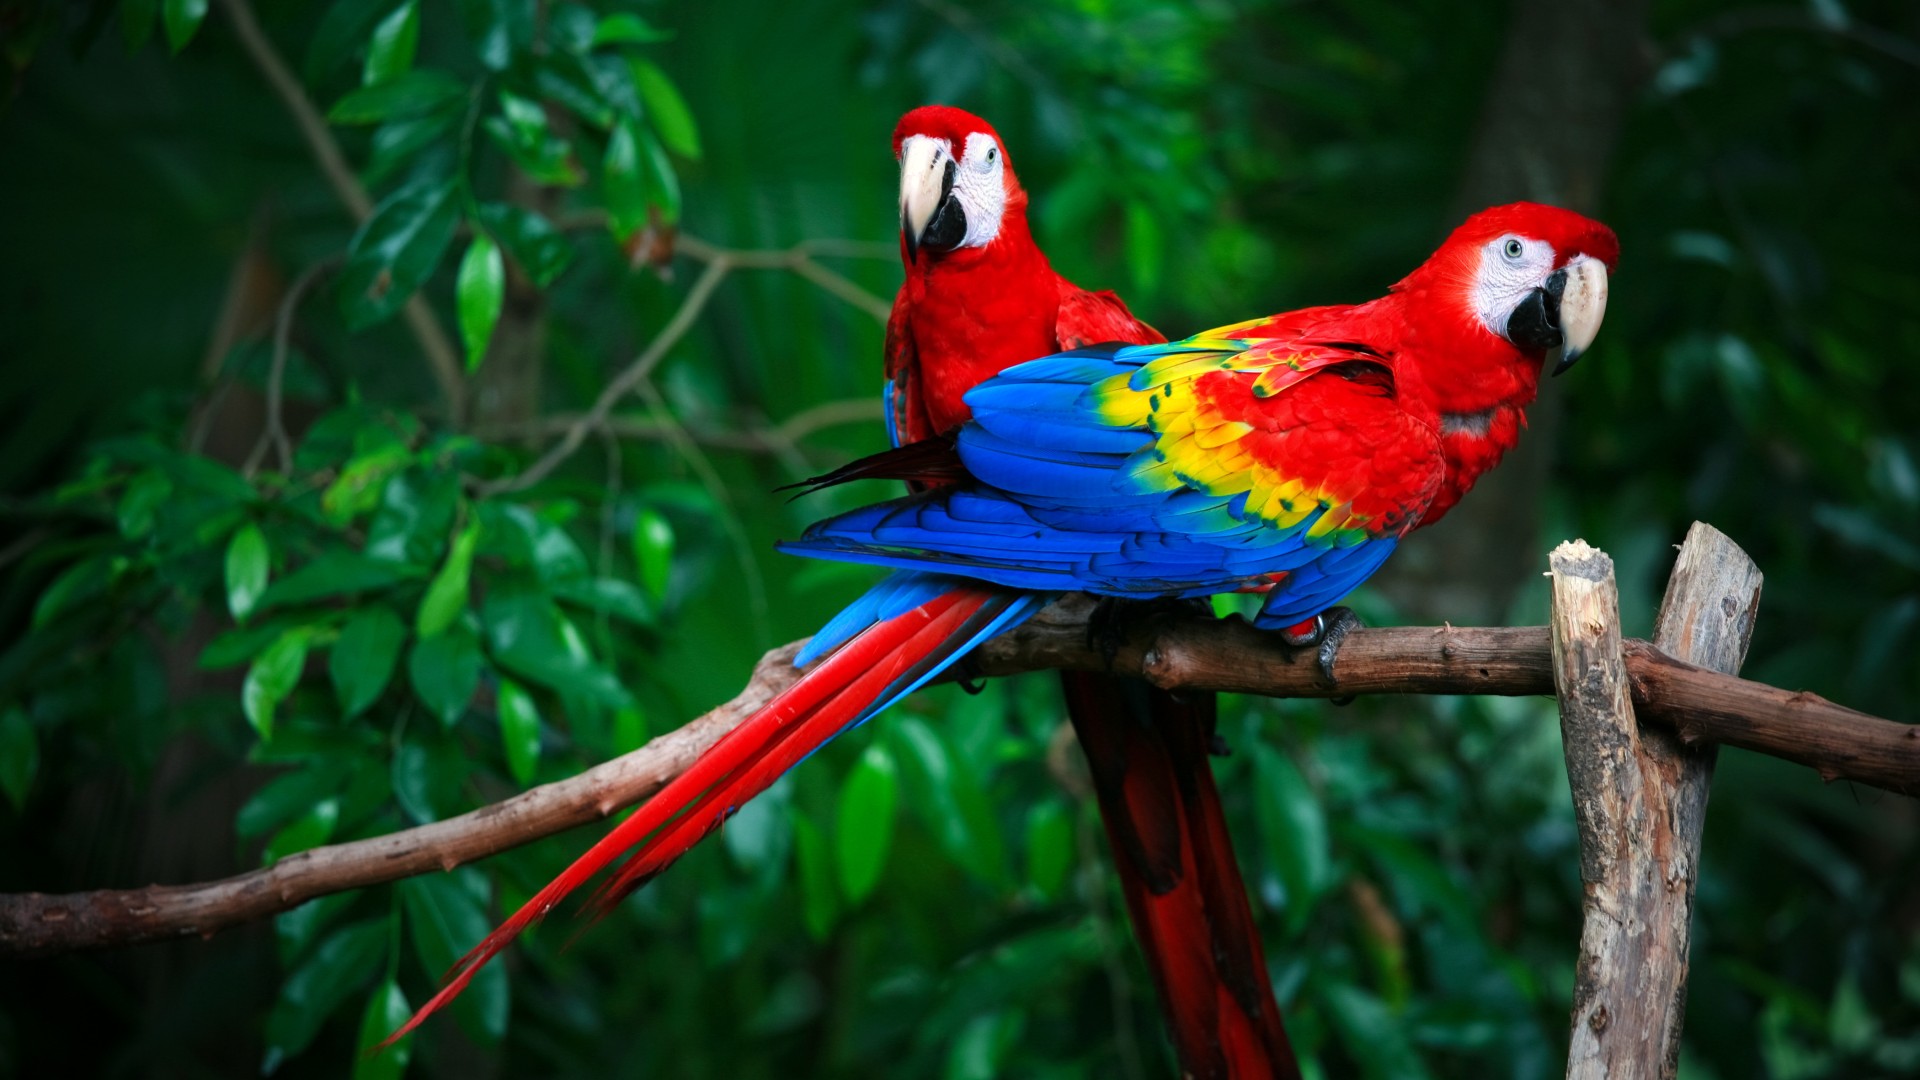 Why do parrots live so long? | Live Science